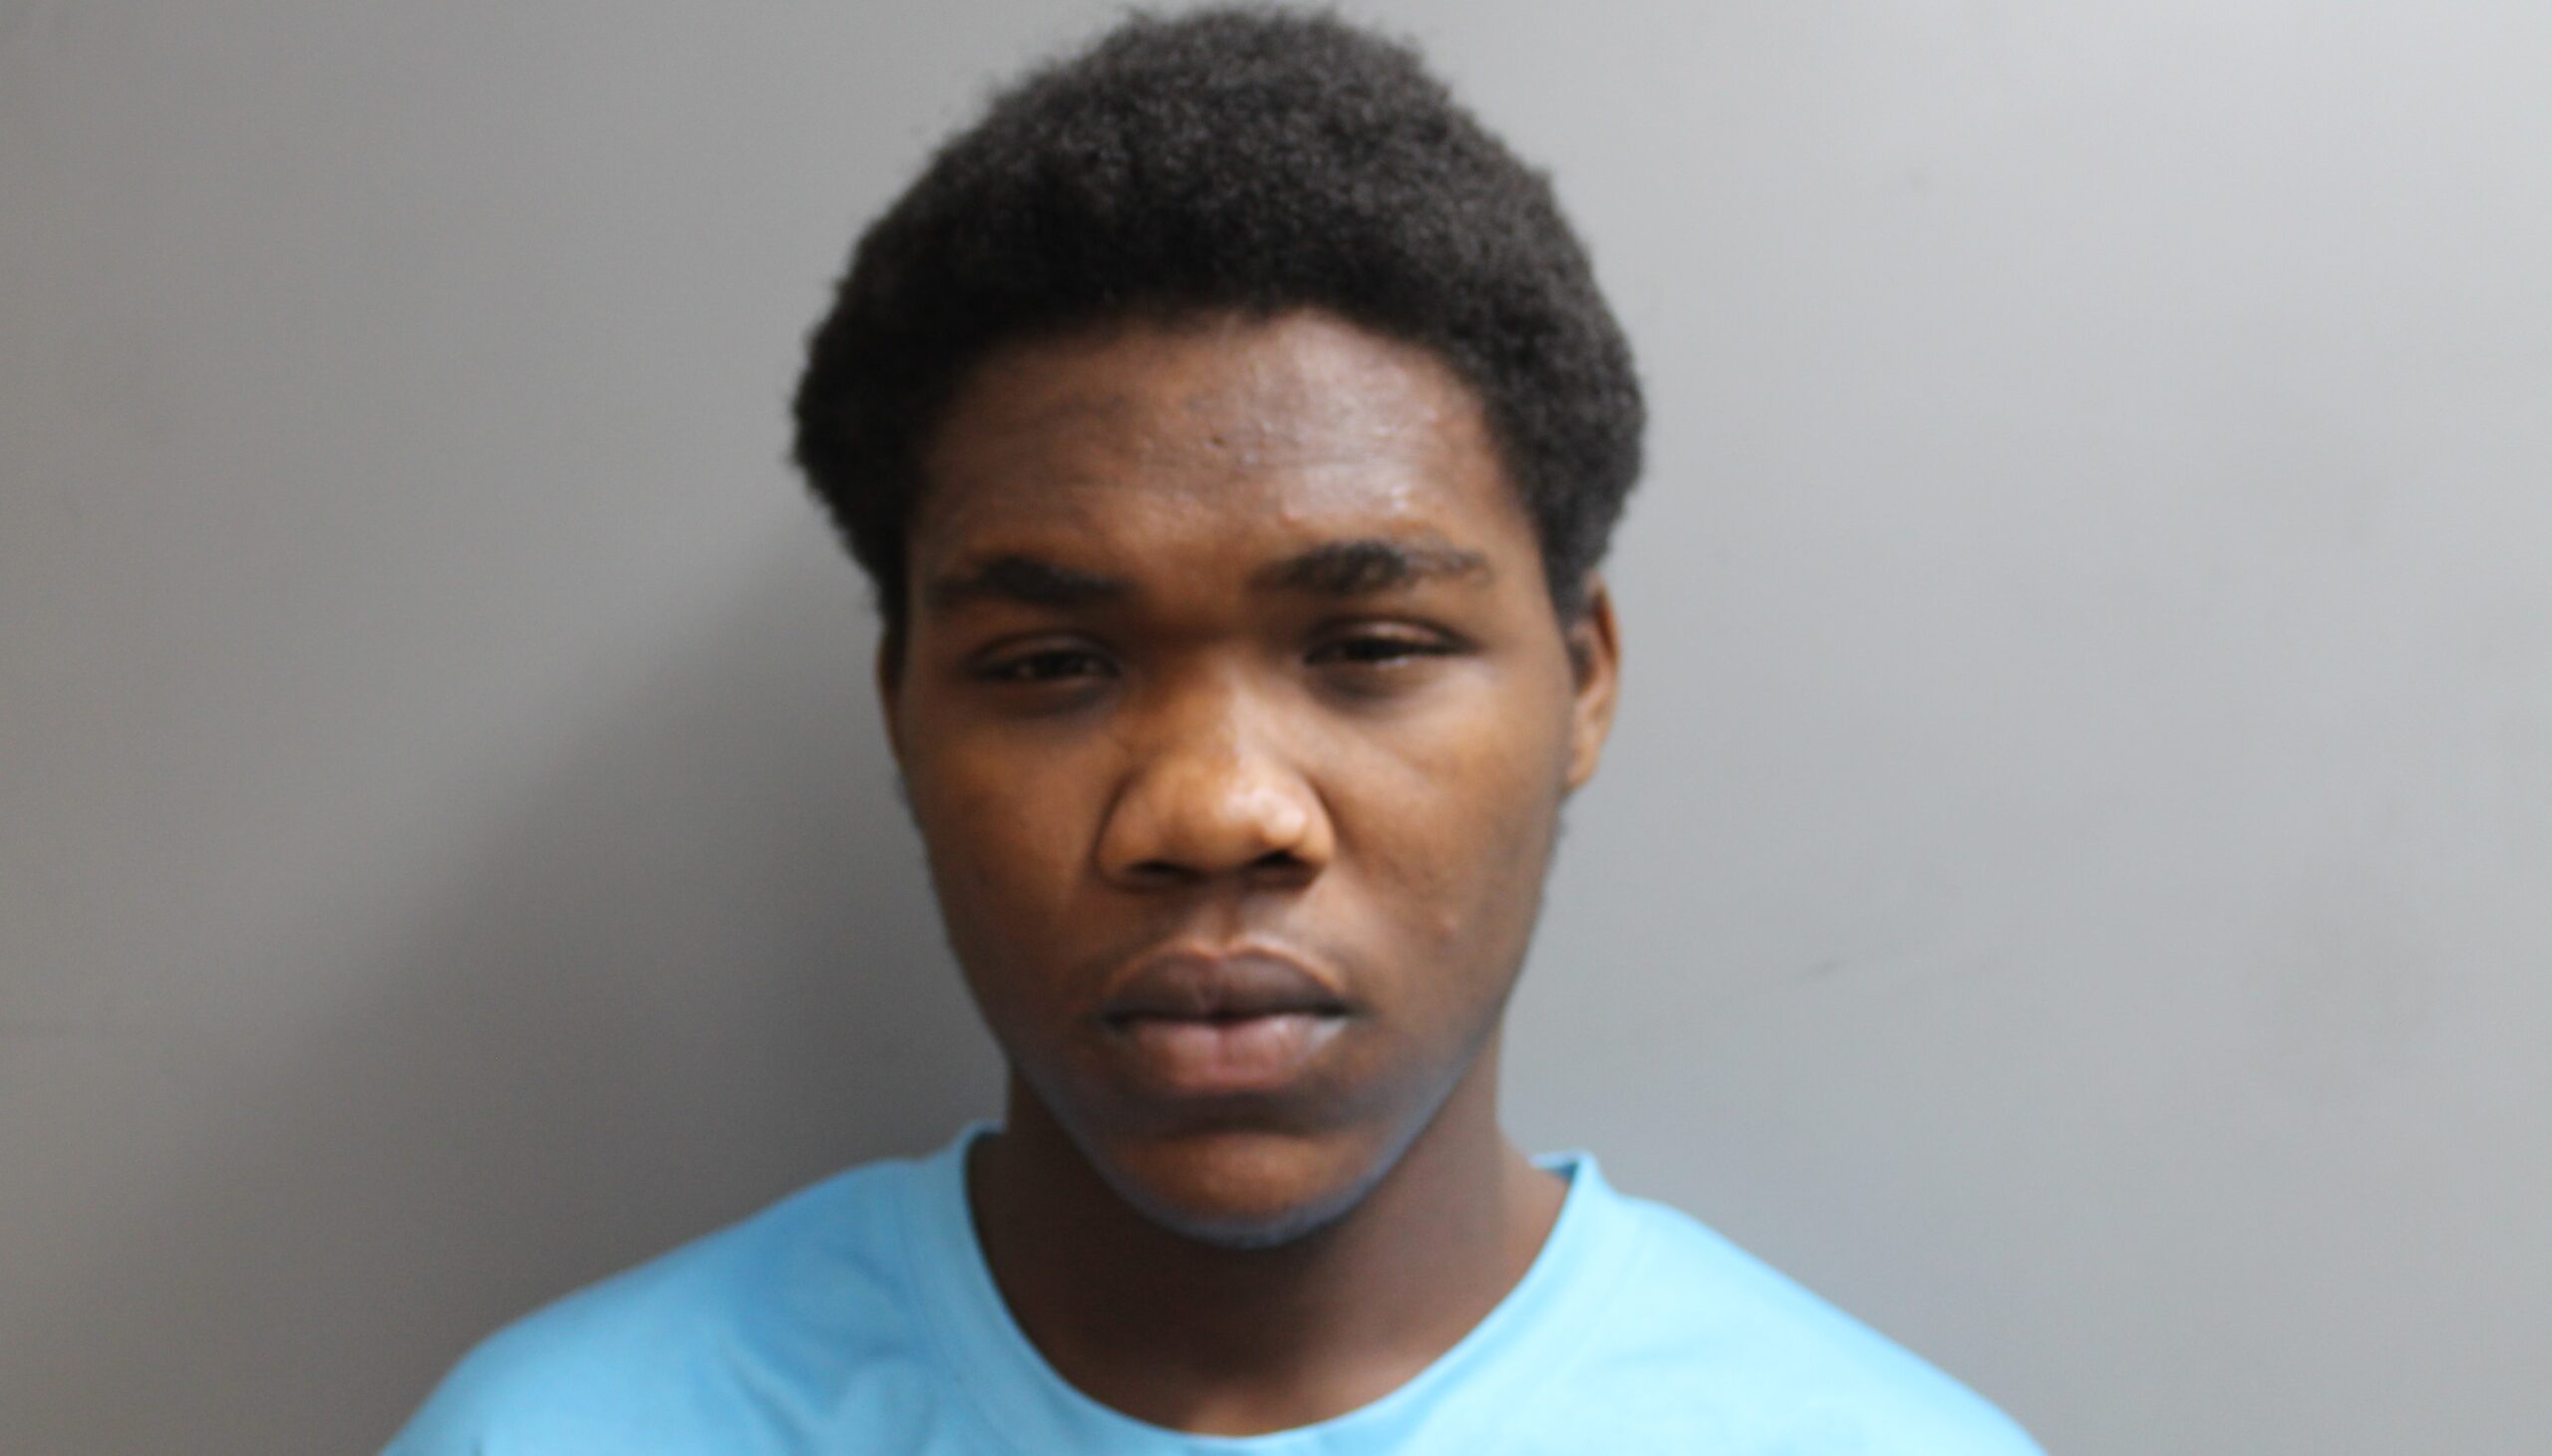 Wanted Armed Robber, A Teenager, Turns Himself In To Police: VIPD